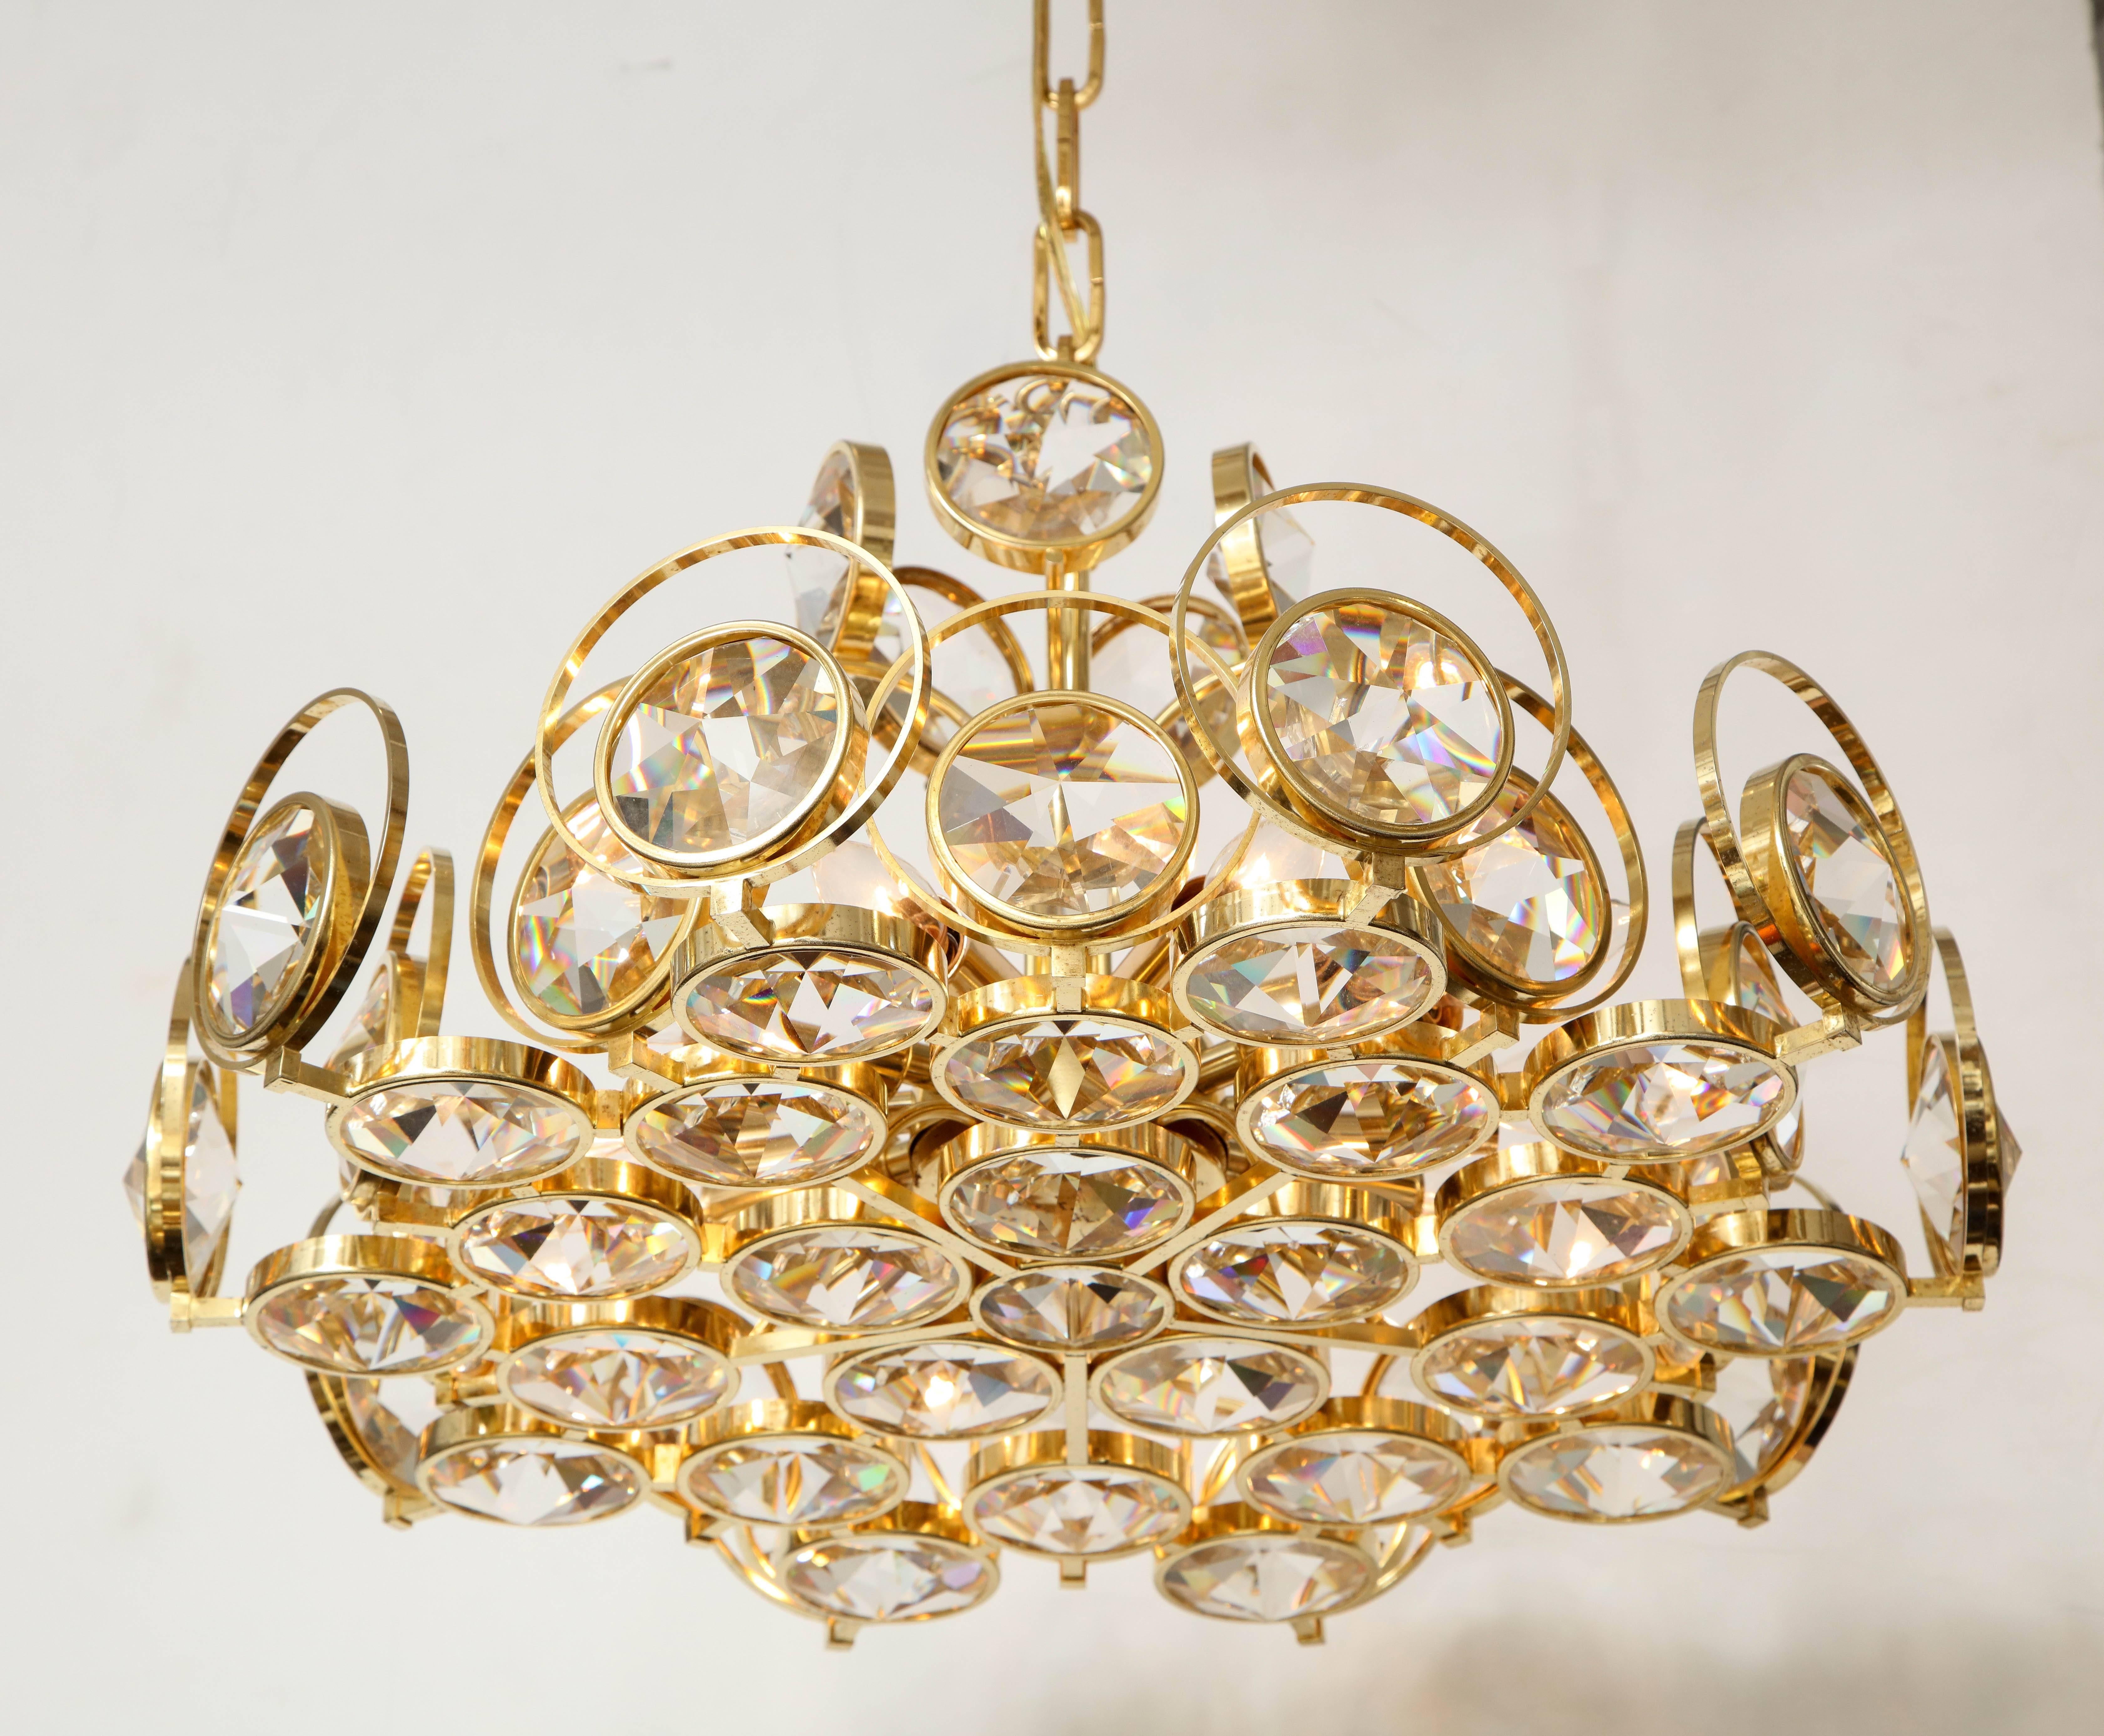 Stunning Hollywood Regency palwa chandelier with a 22 karat gilt brass frame and chain with faceted crystal embellishment suspended within the frame by Palwa. Rewired for use in the USA, fixture has 12 light sources. 

Chandelier body measures 19